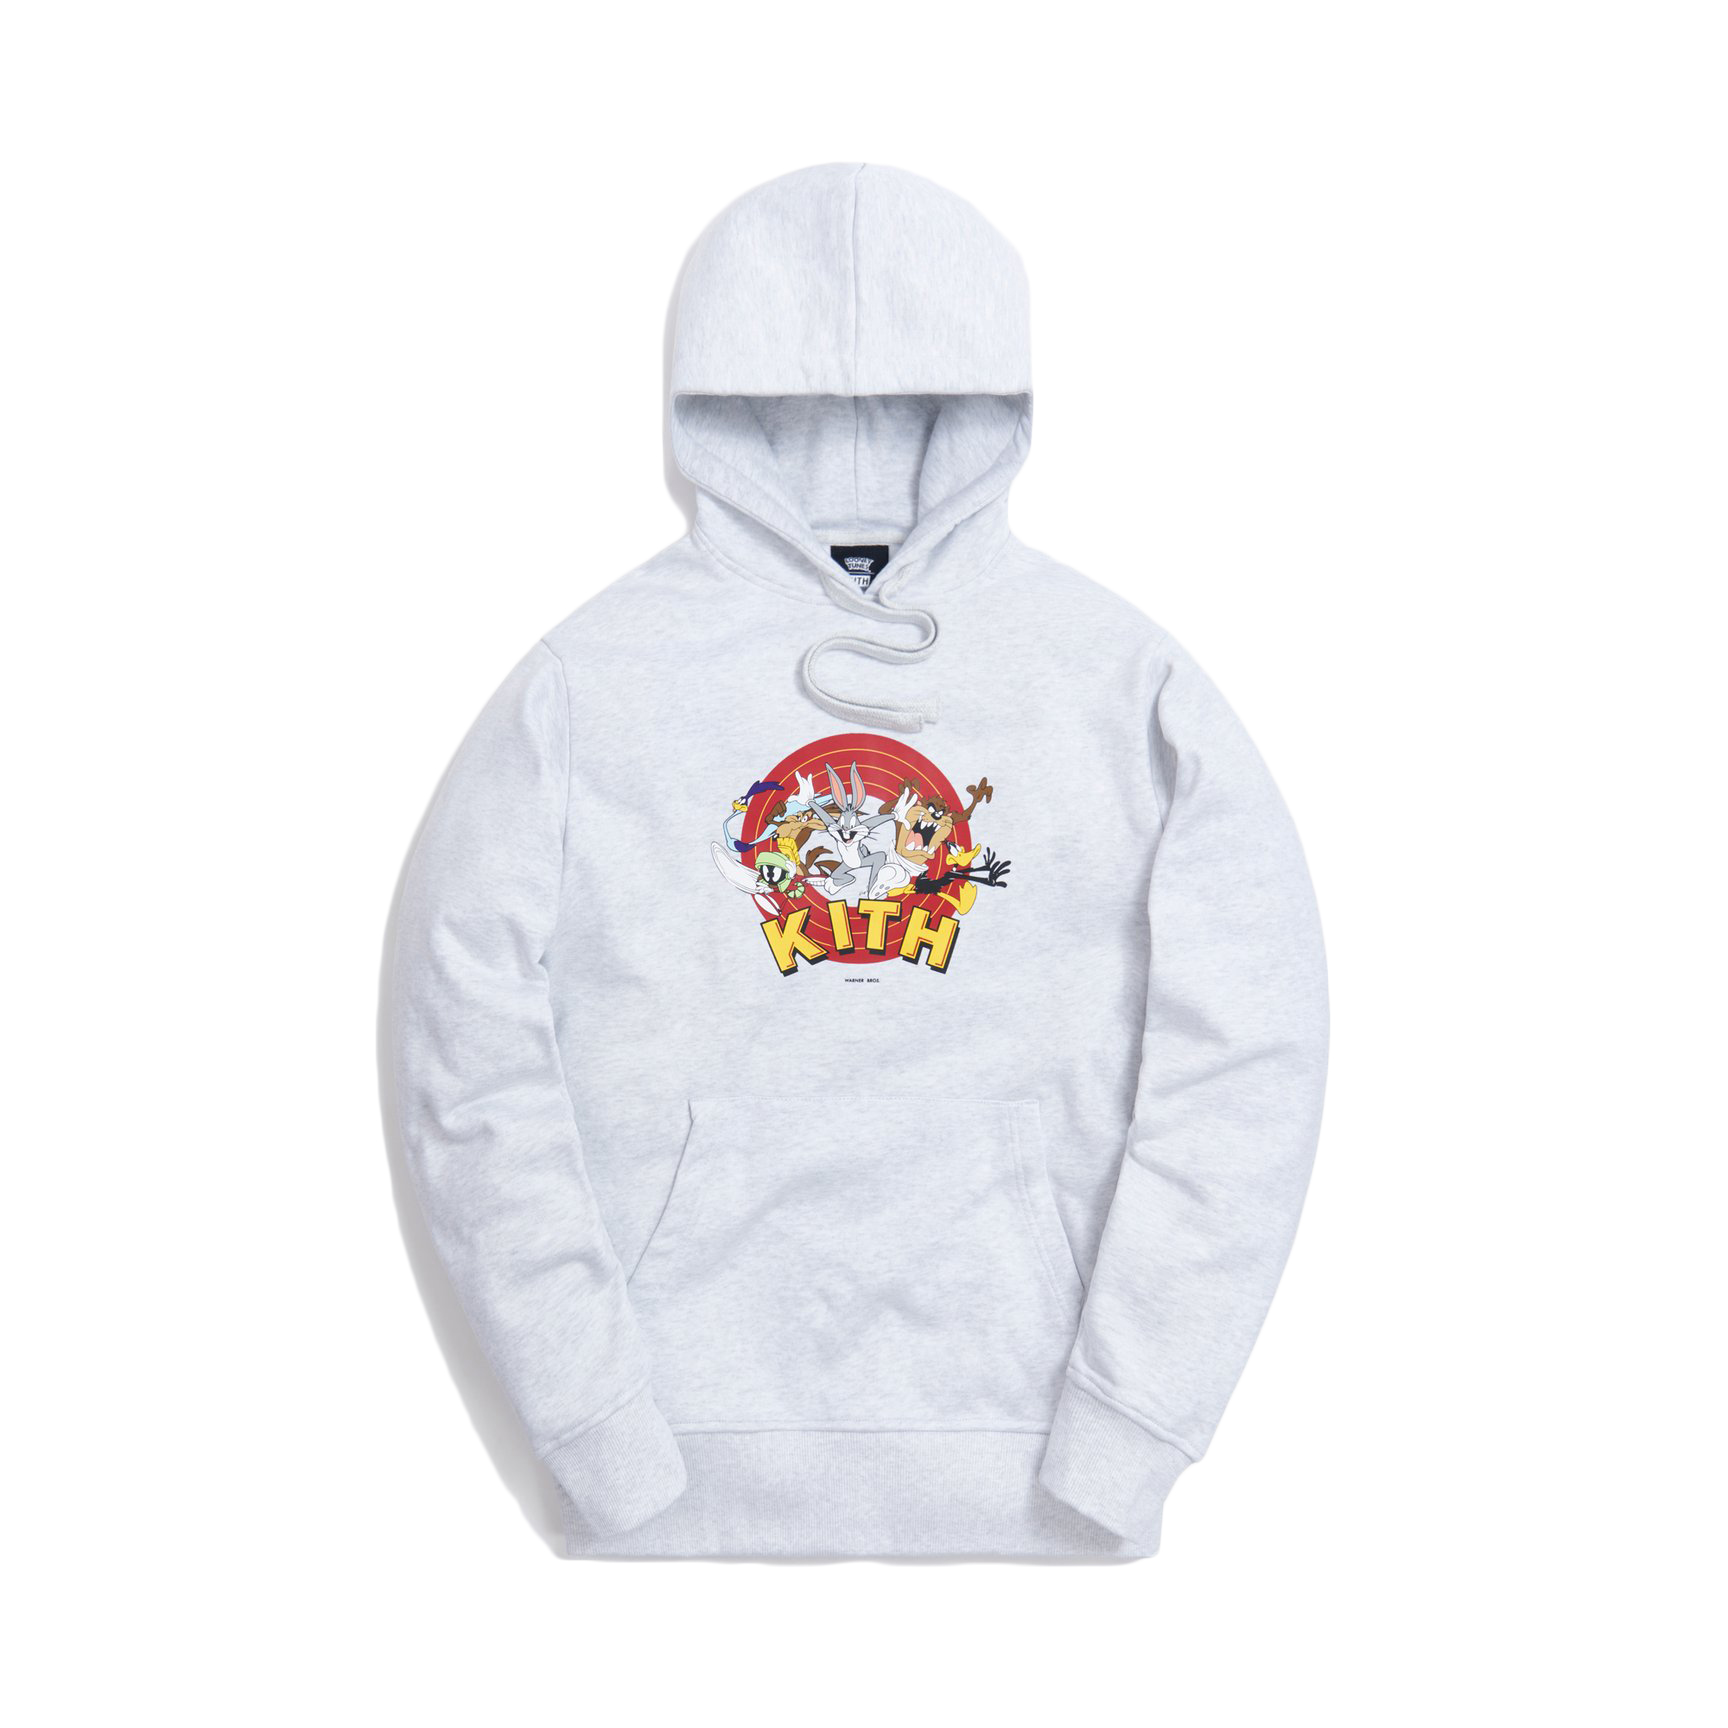 KITH x Looney Tunes That's All Folks Hoodie Heather Grey - Novelship